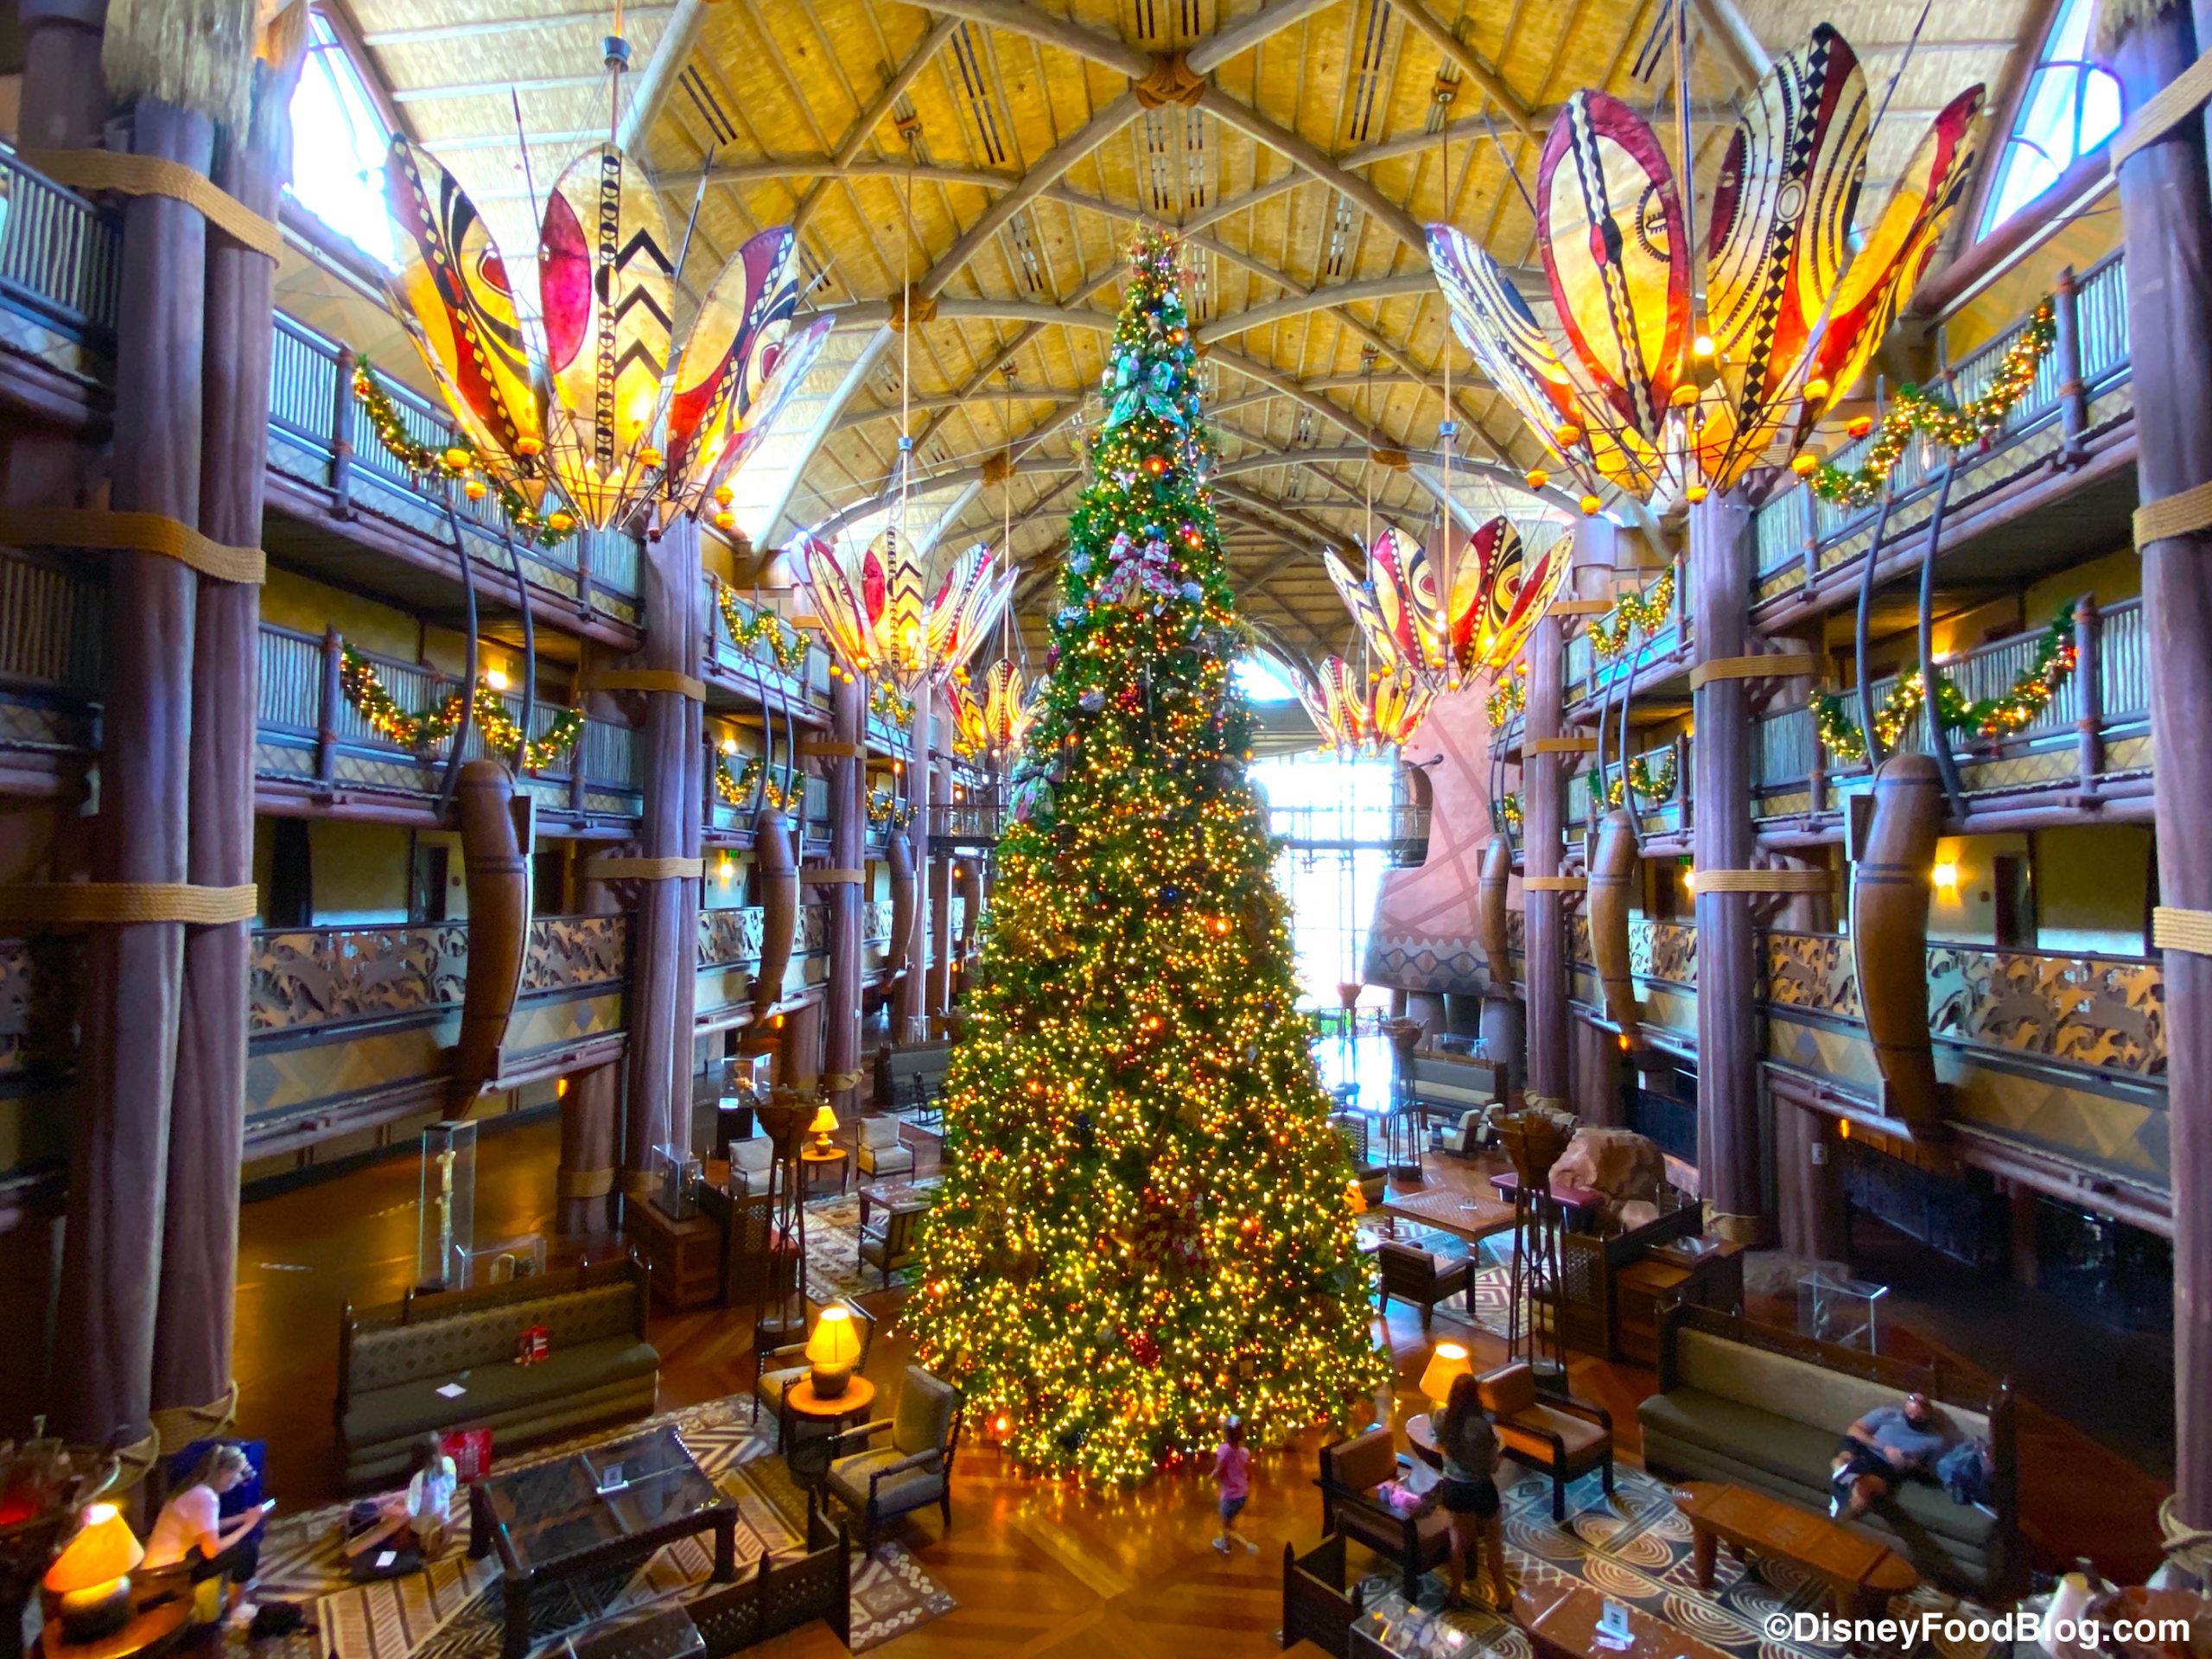 PHOTO! The Christmas Tree is Up at Pop Century Resort in Disney World